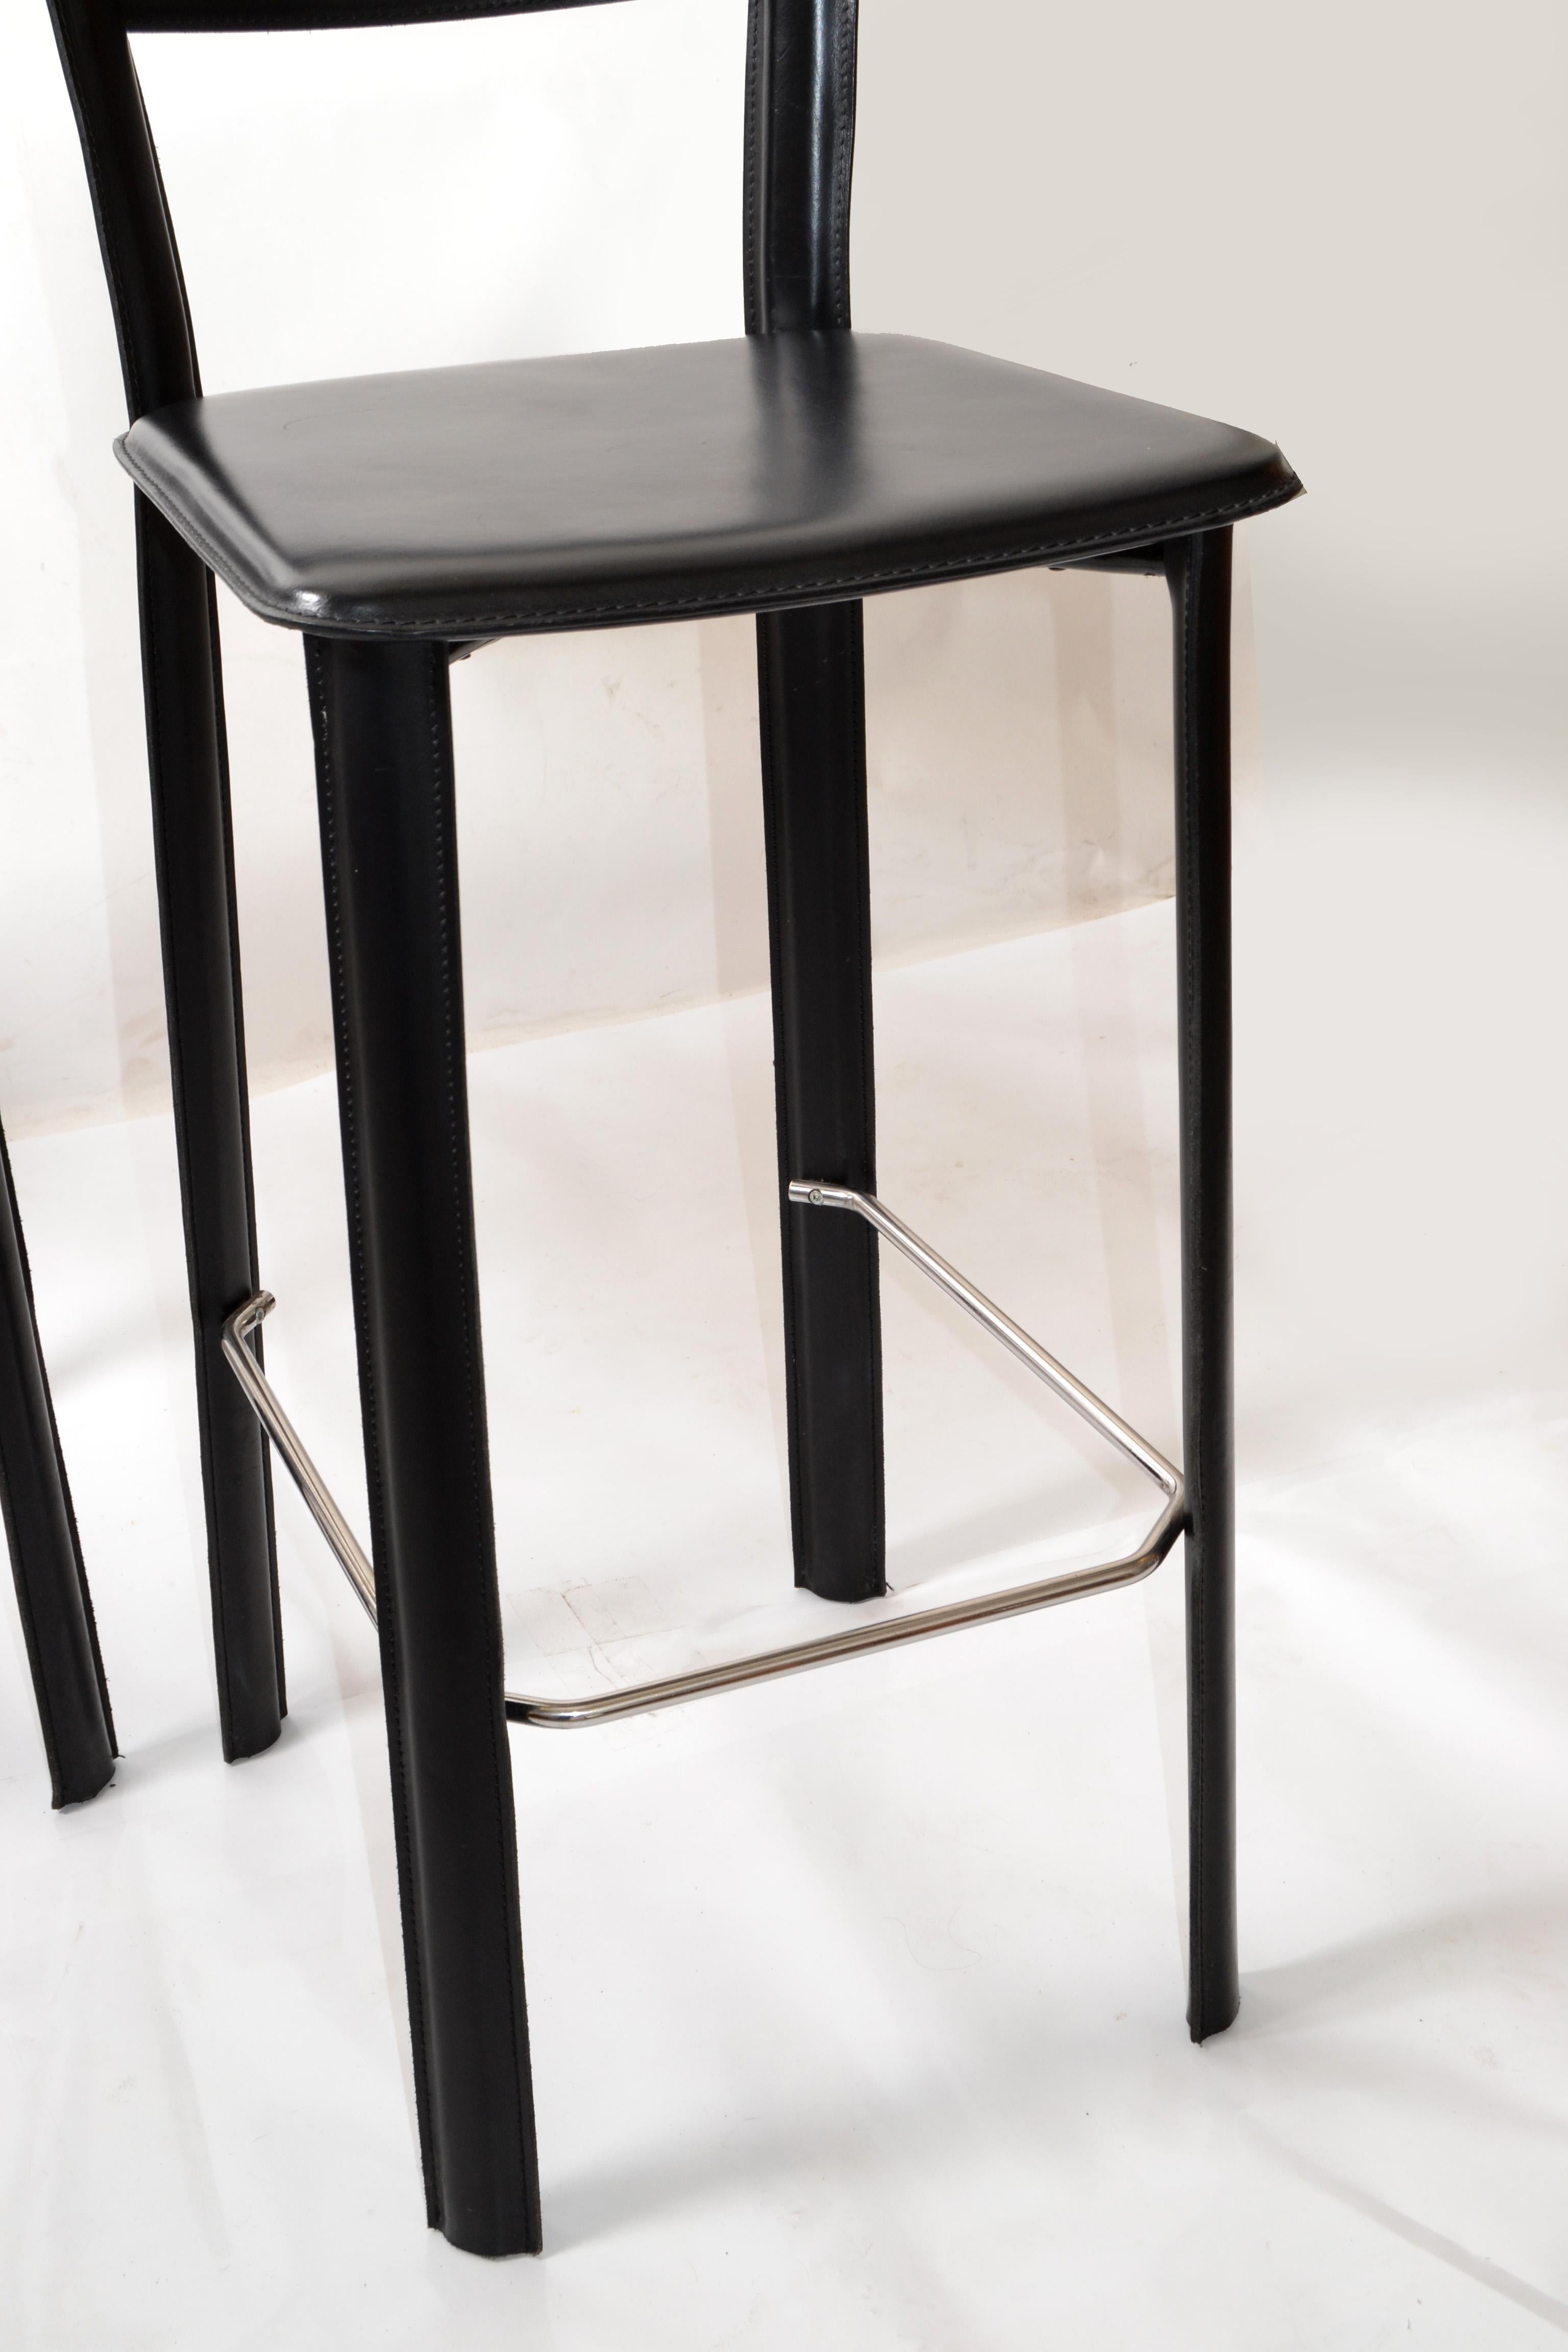 Set of 3 Italian Hand Stitched Frag Black Leather Chrome Bar Stools Contemporary 4